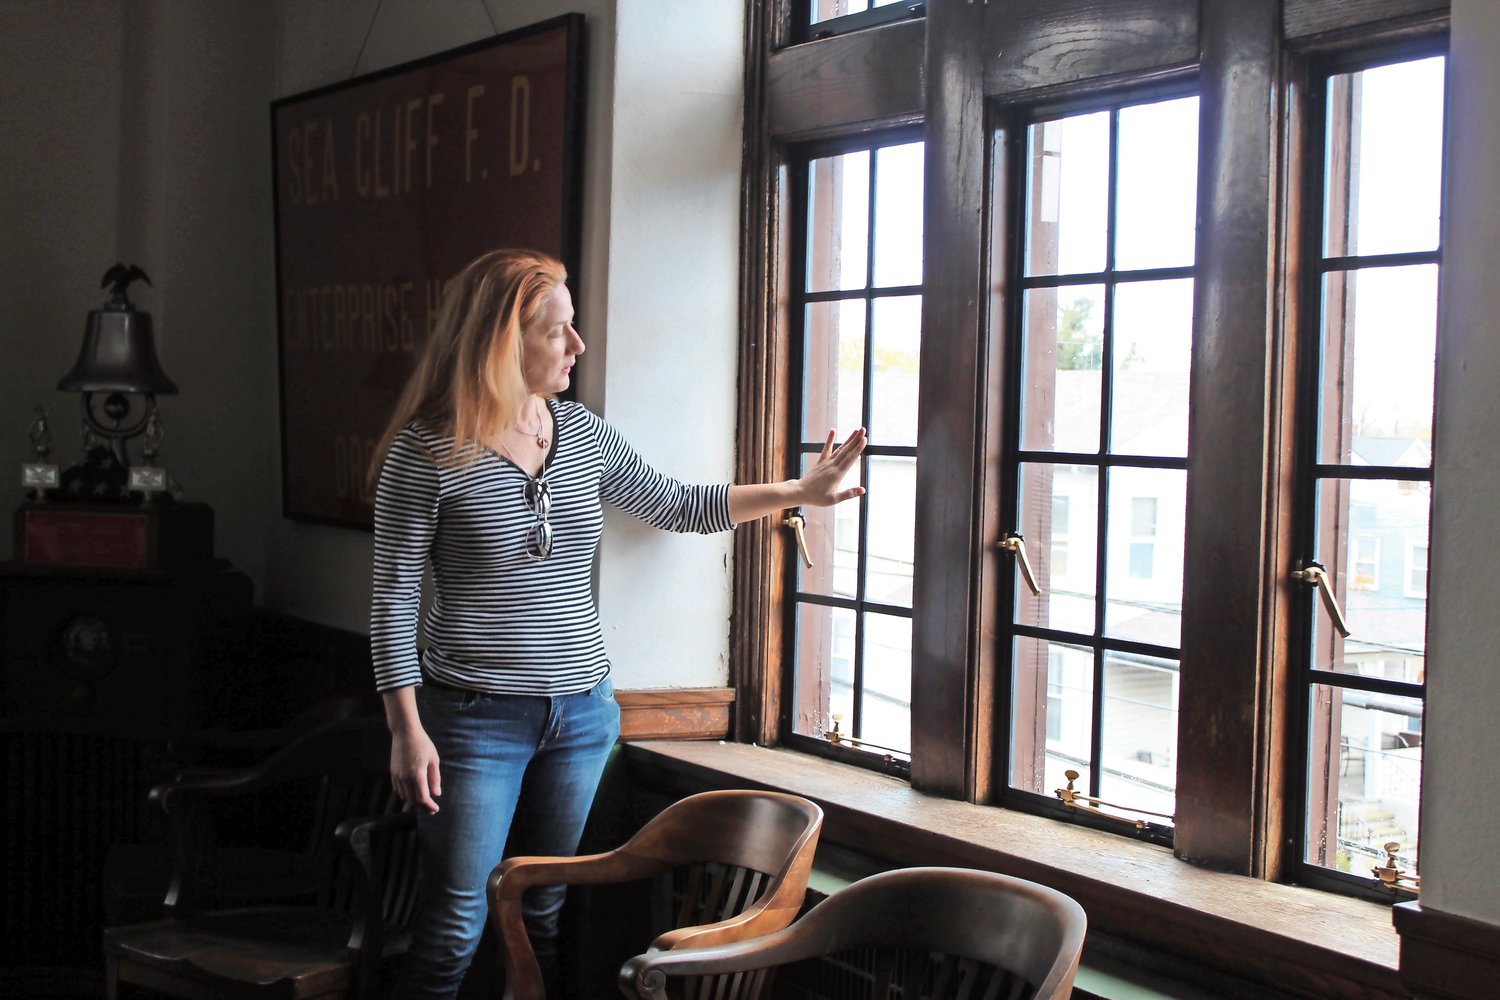 Erinn McDonnell, the Village of Sea Cliff grant writer, looked out onto Roslyn Avenue through the newly restored windows of the Sea Cliff Firehouse.